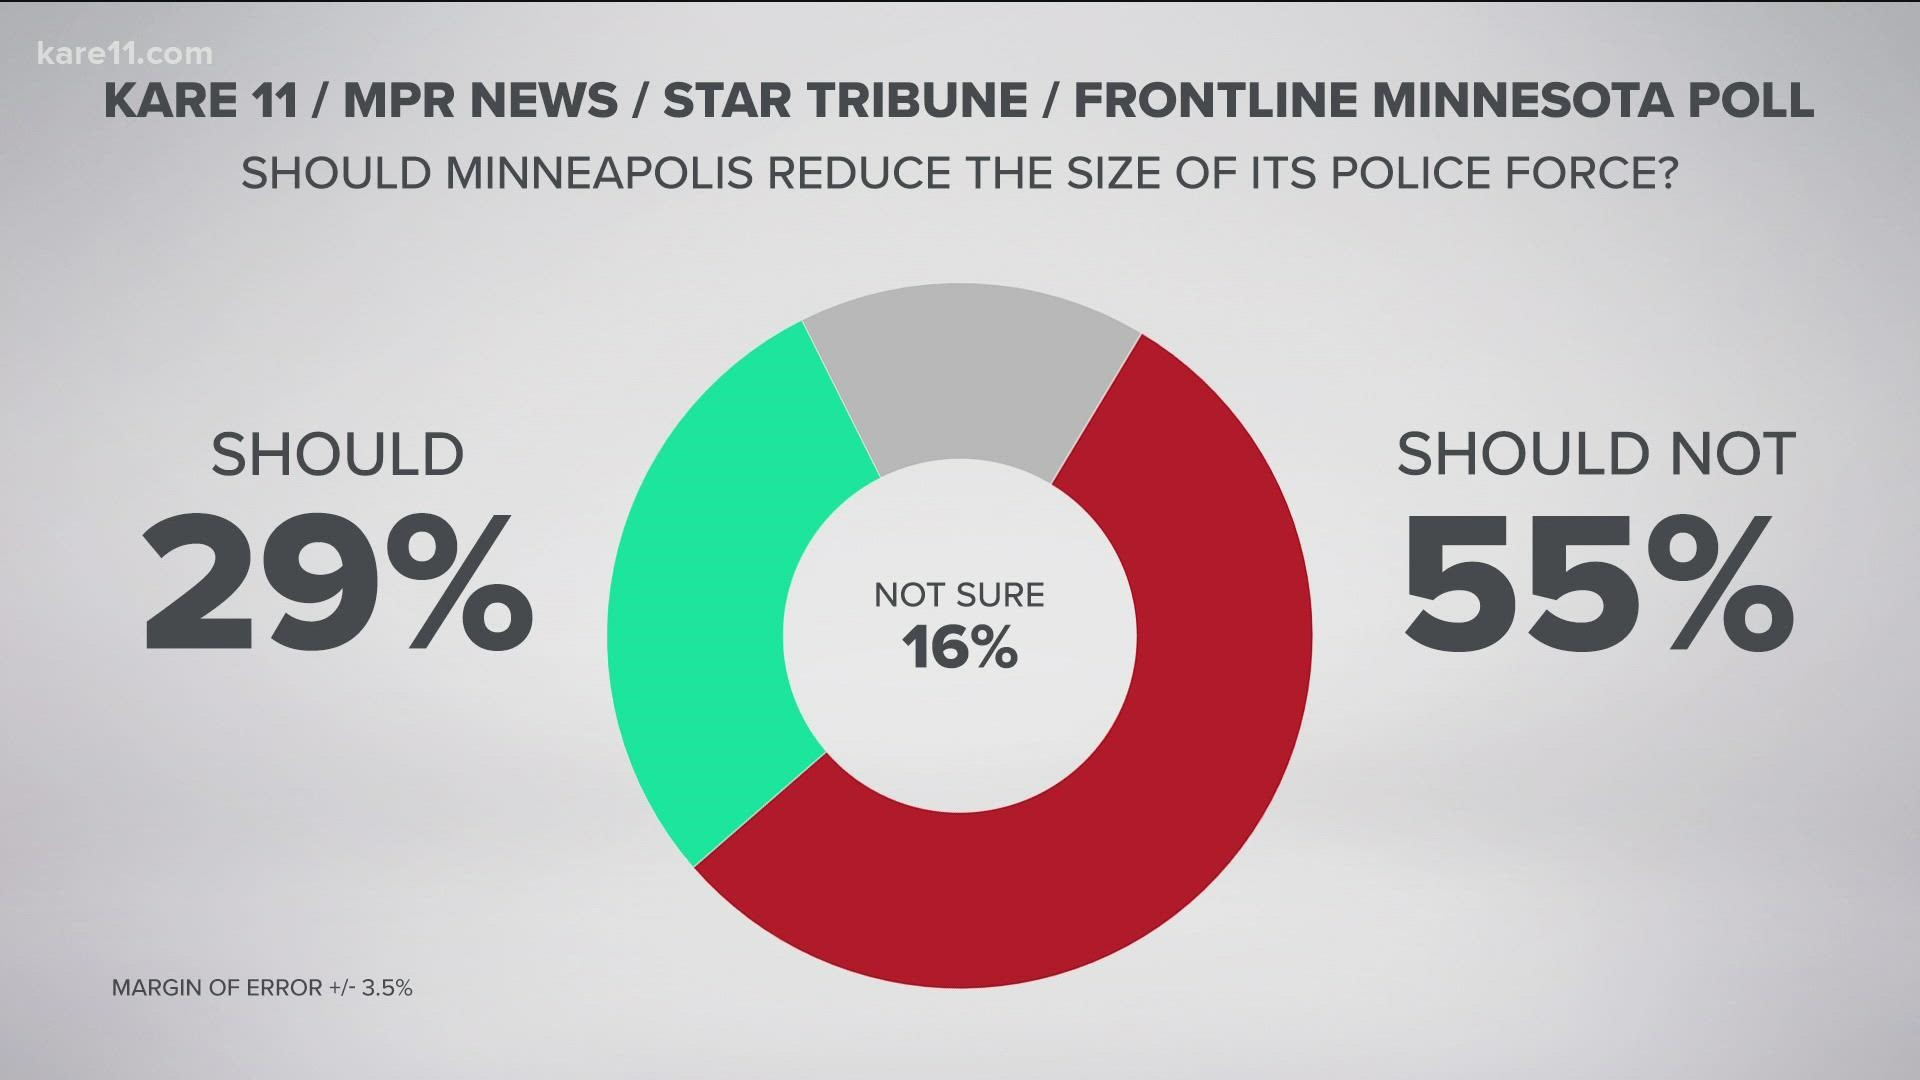 A new KARE 11/MPR News/Star Tribune/FRONTLINE Minnesota Poll found most voters think the size of the police department shouldn't be reduced.